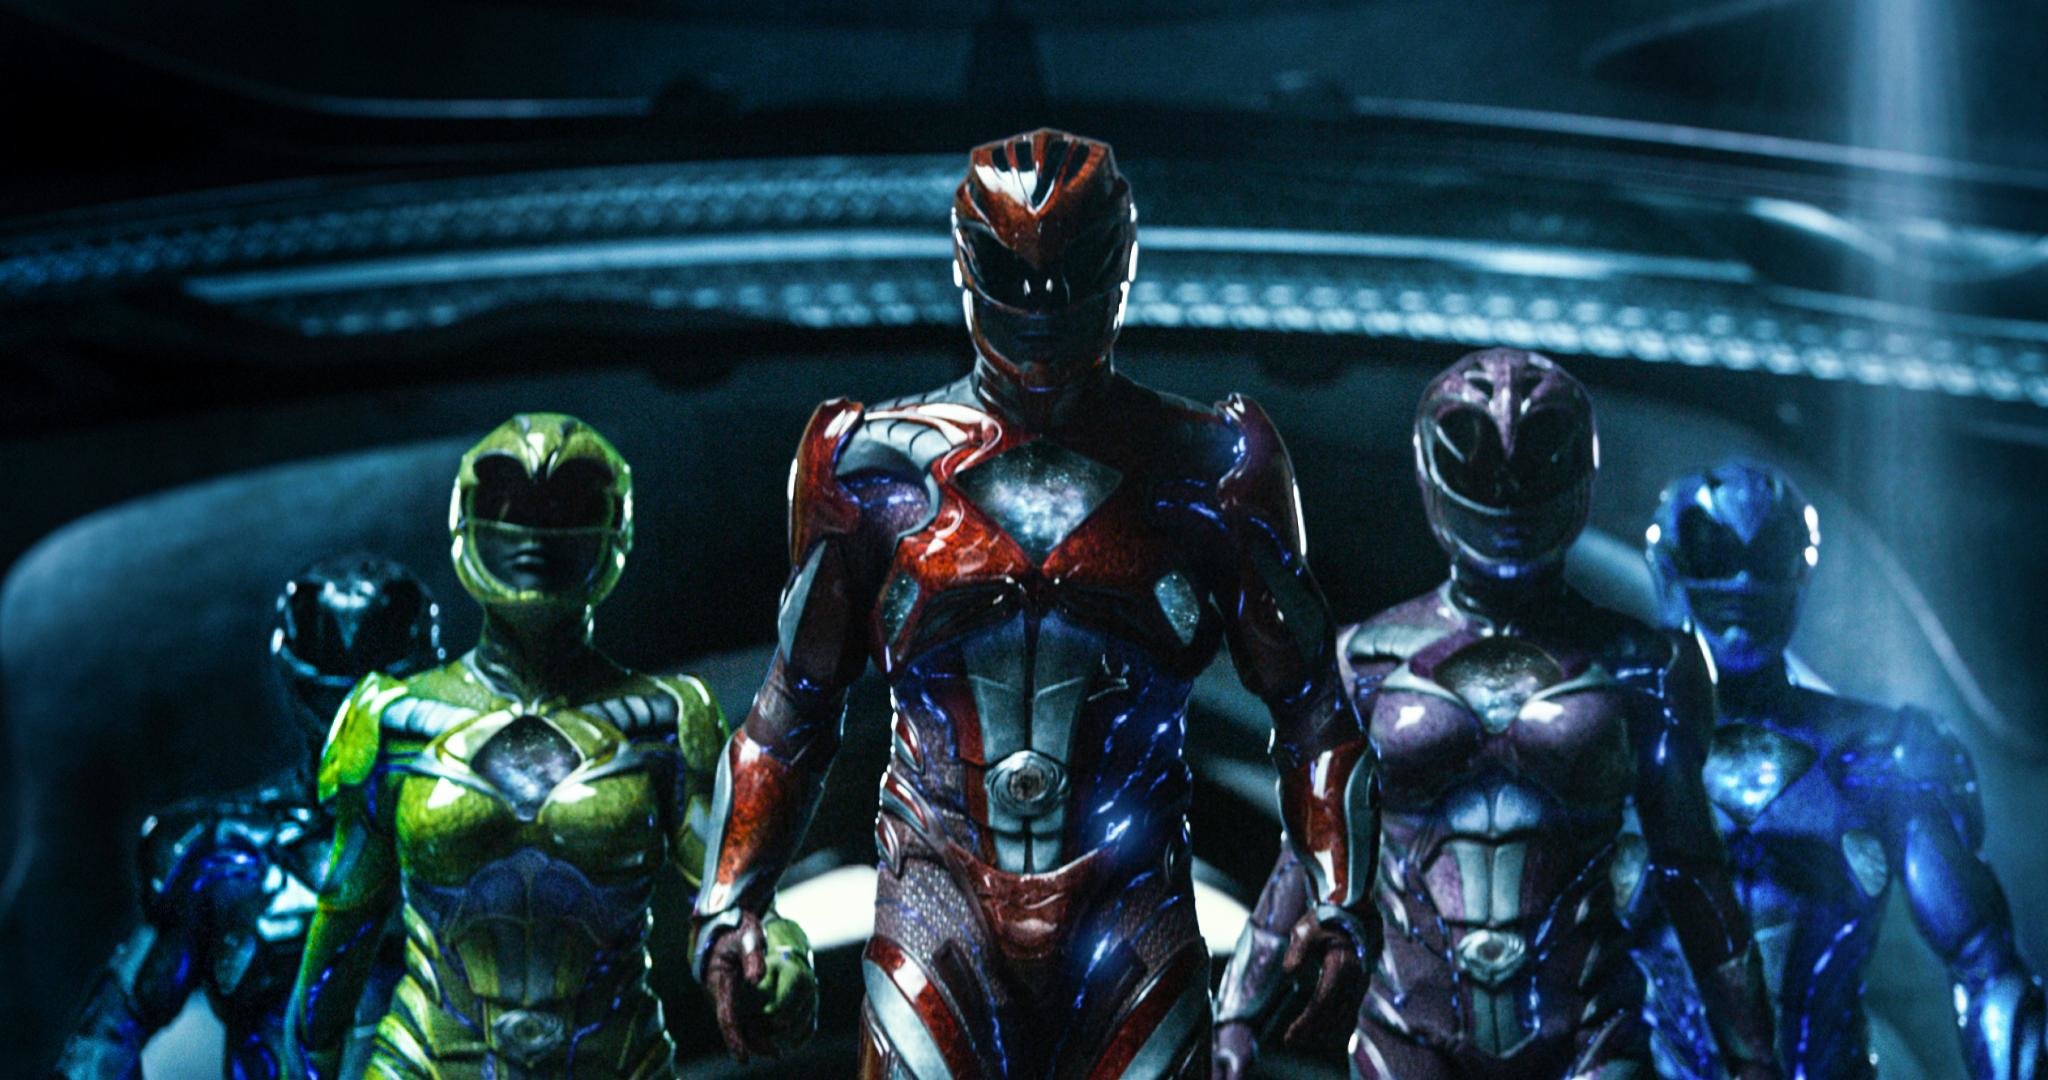 Best Power Rangers (2017) movie wallpaper ID:110604 for High Resolution hd 2048x1080 PC